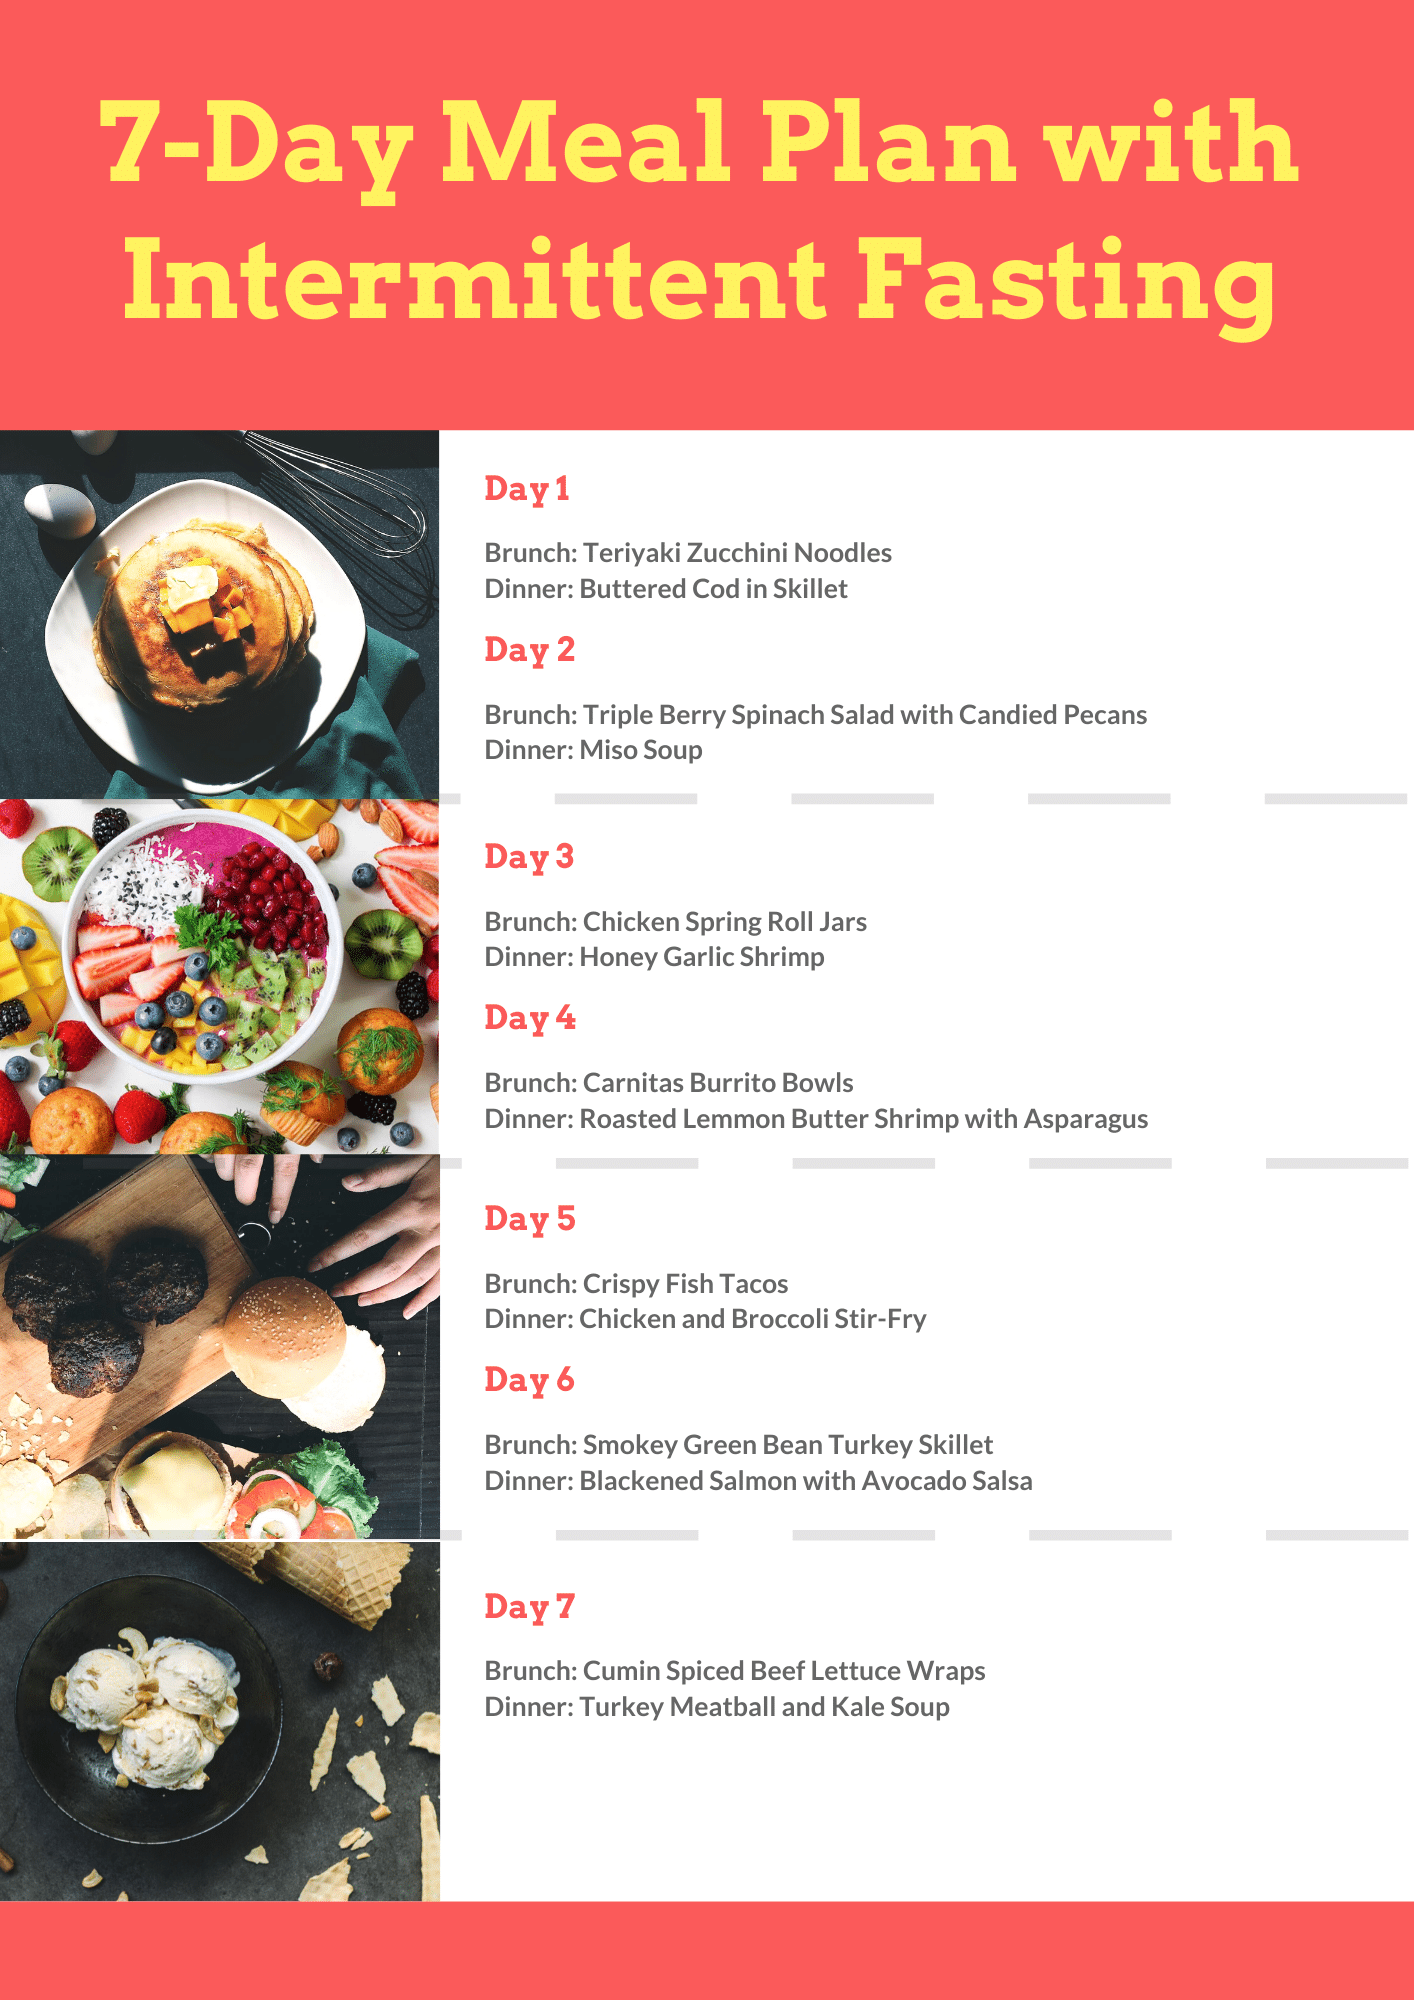 7-Day Meal Plan with Intermittent Fasting